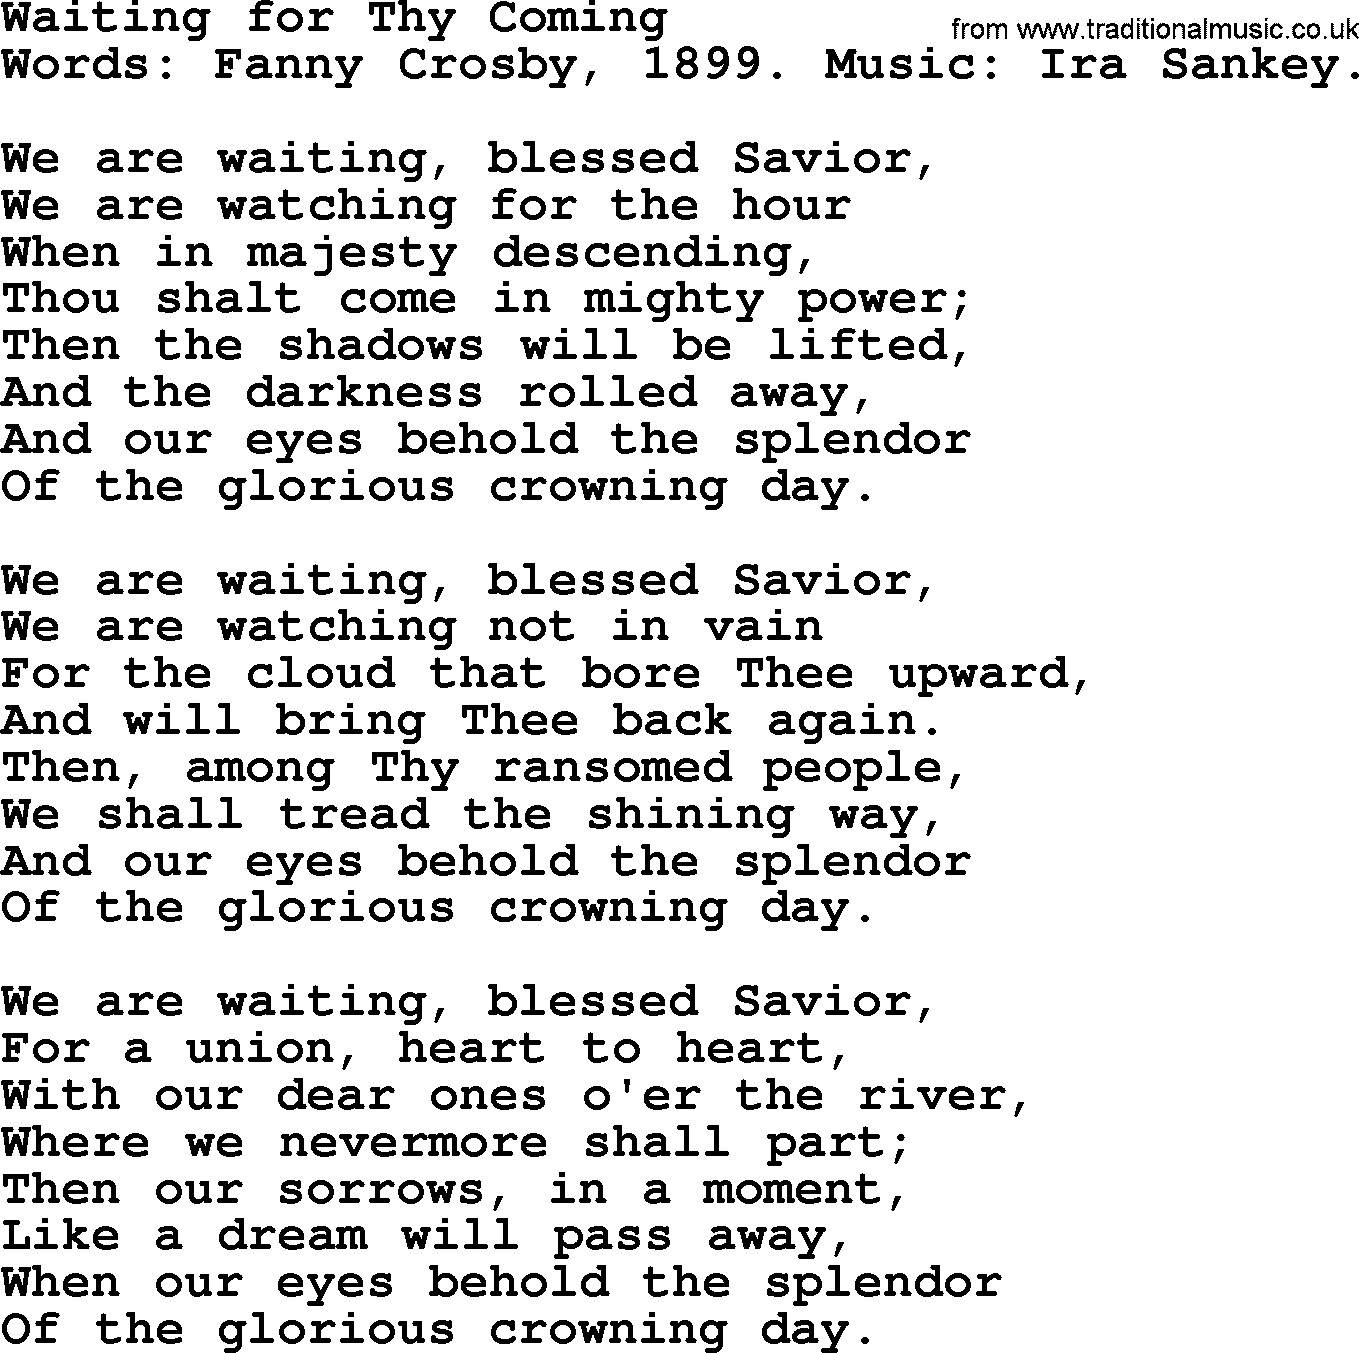 Fanny Crosby song: Waiting For Thy Coming, lyrics